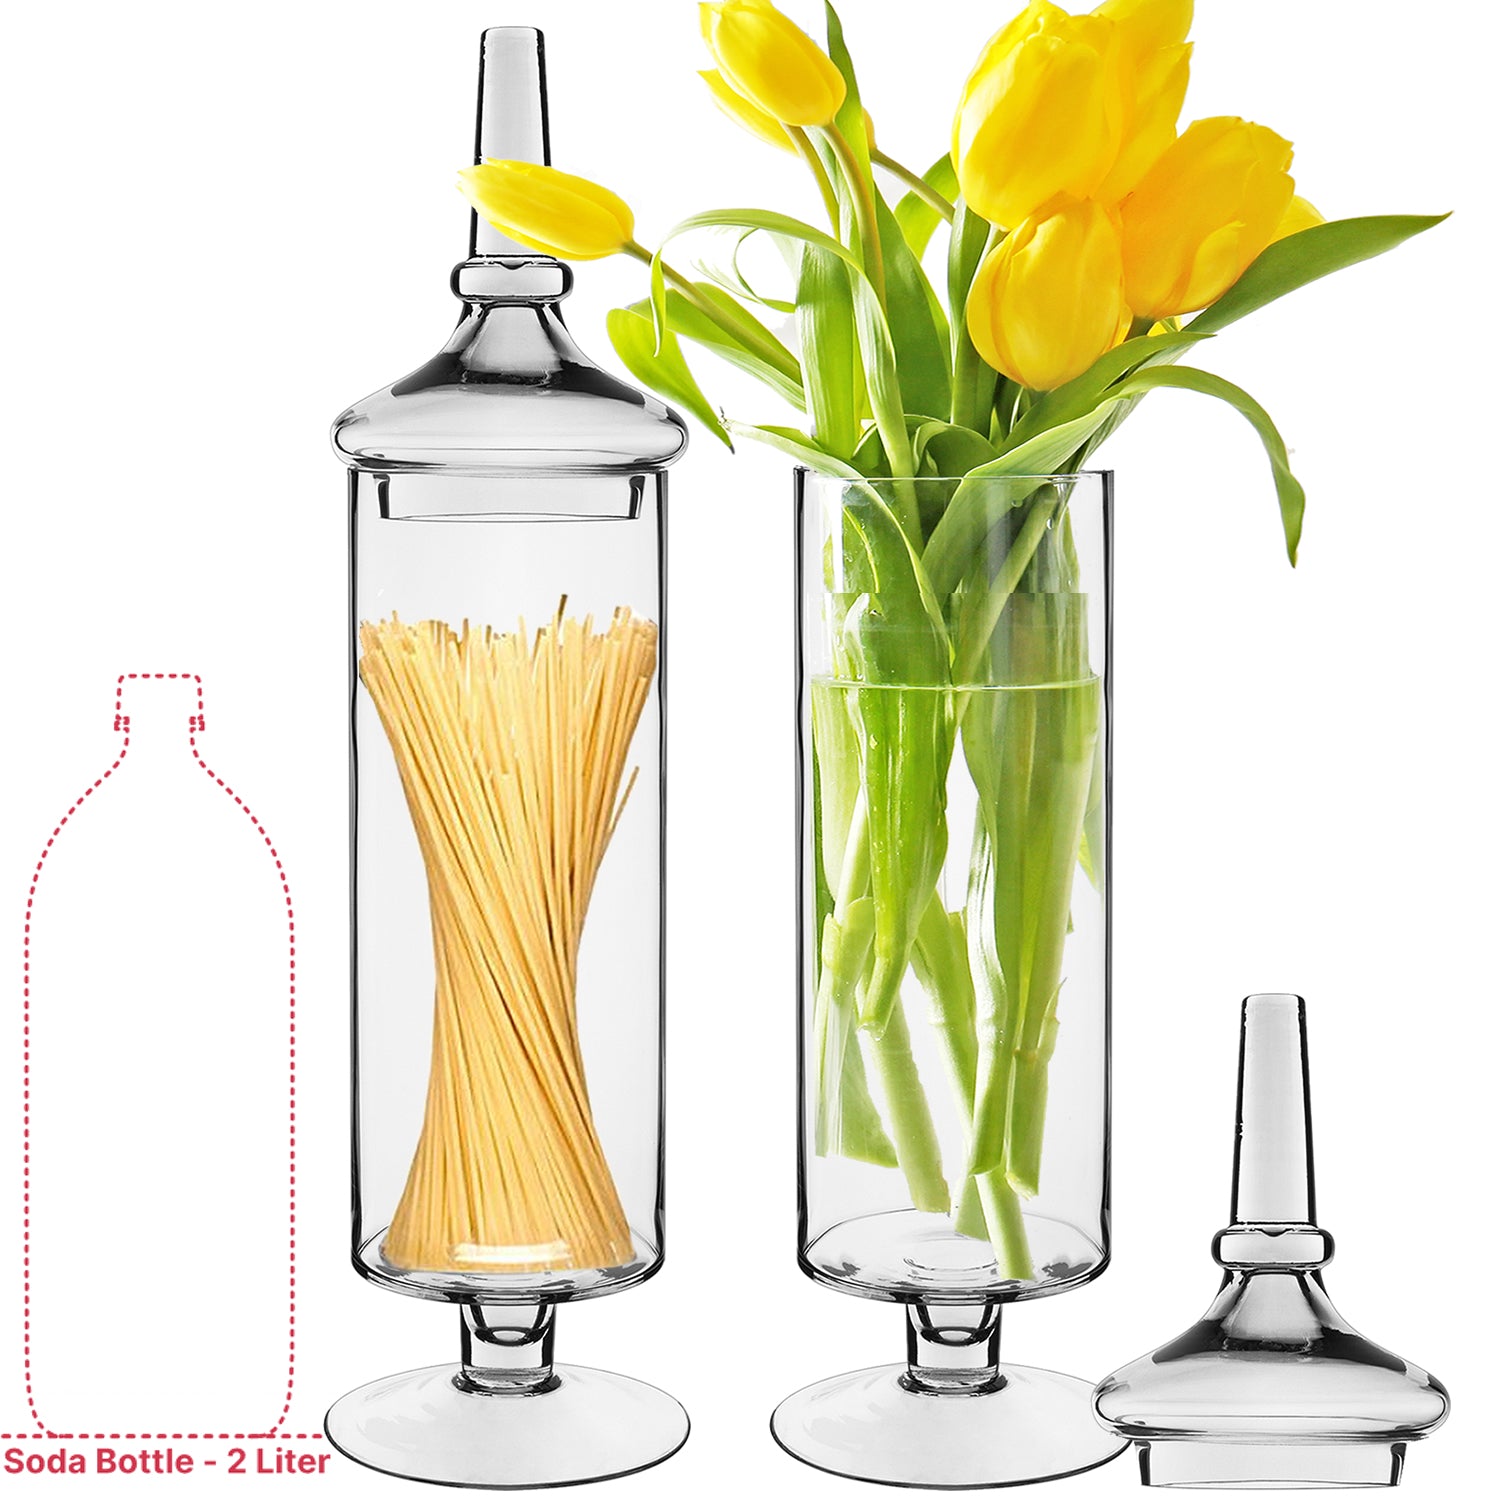 5 Pieces Clear Glass Apothecary Jars Glass Candy Jar with Lids